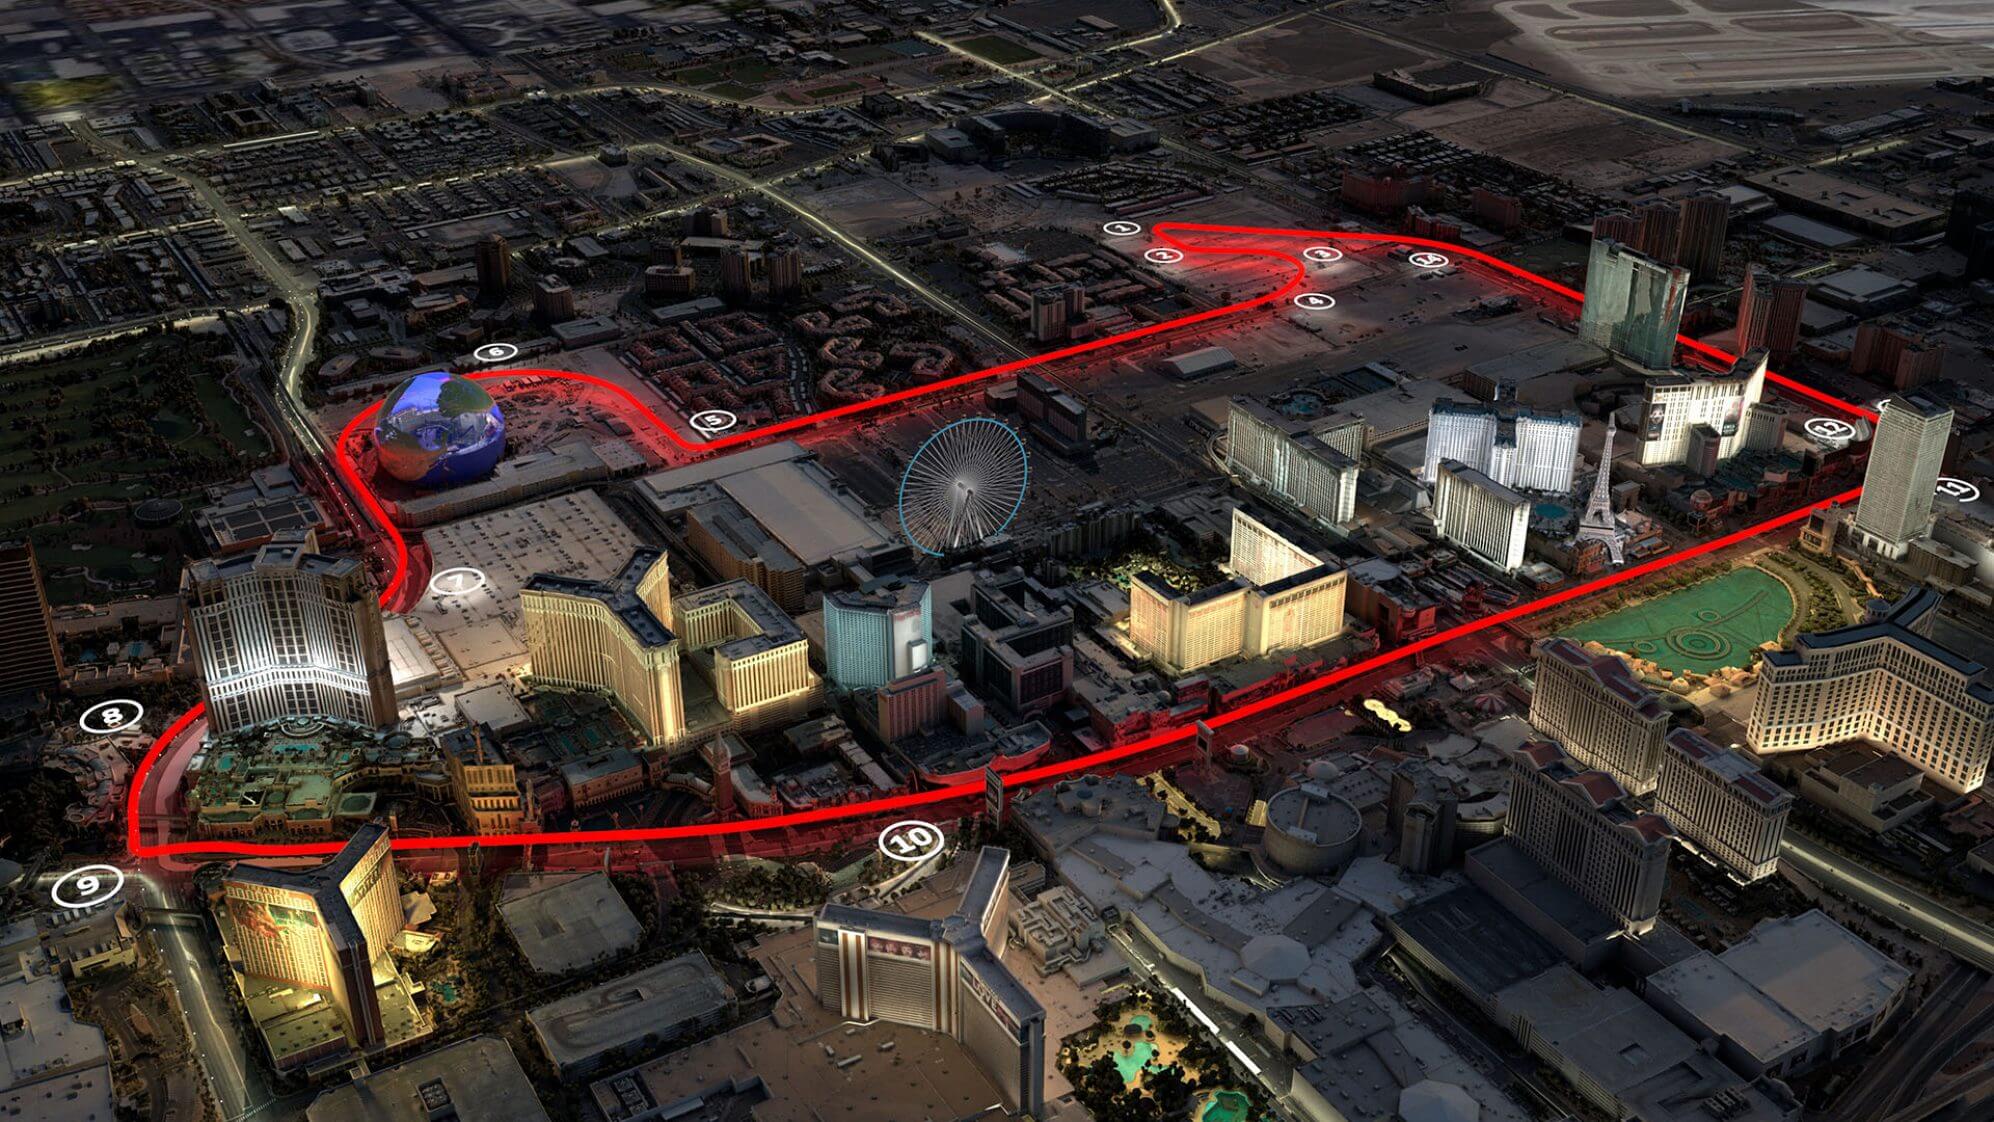 Image showing track layout for the 2023 F1 race in Las Vegas, which will see drivers flying past casinos.